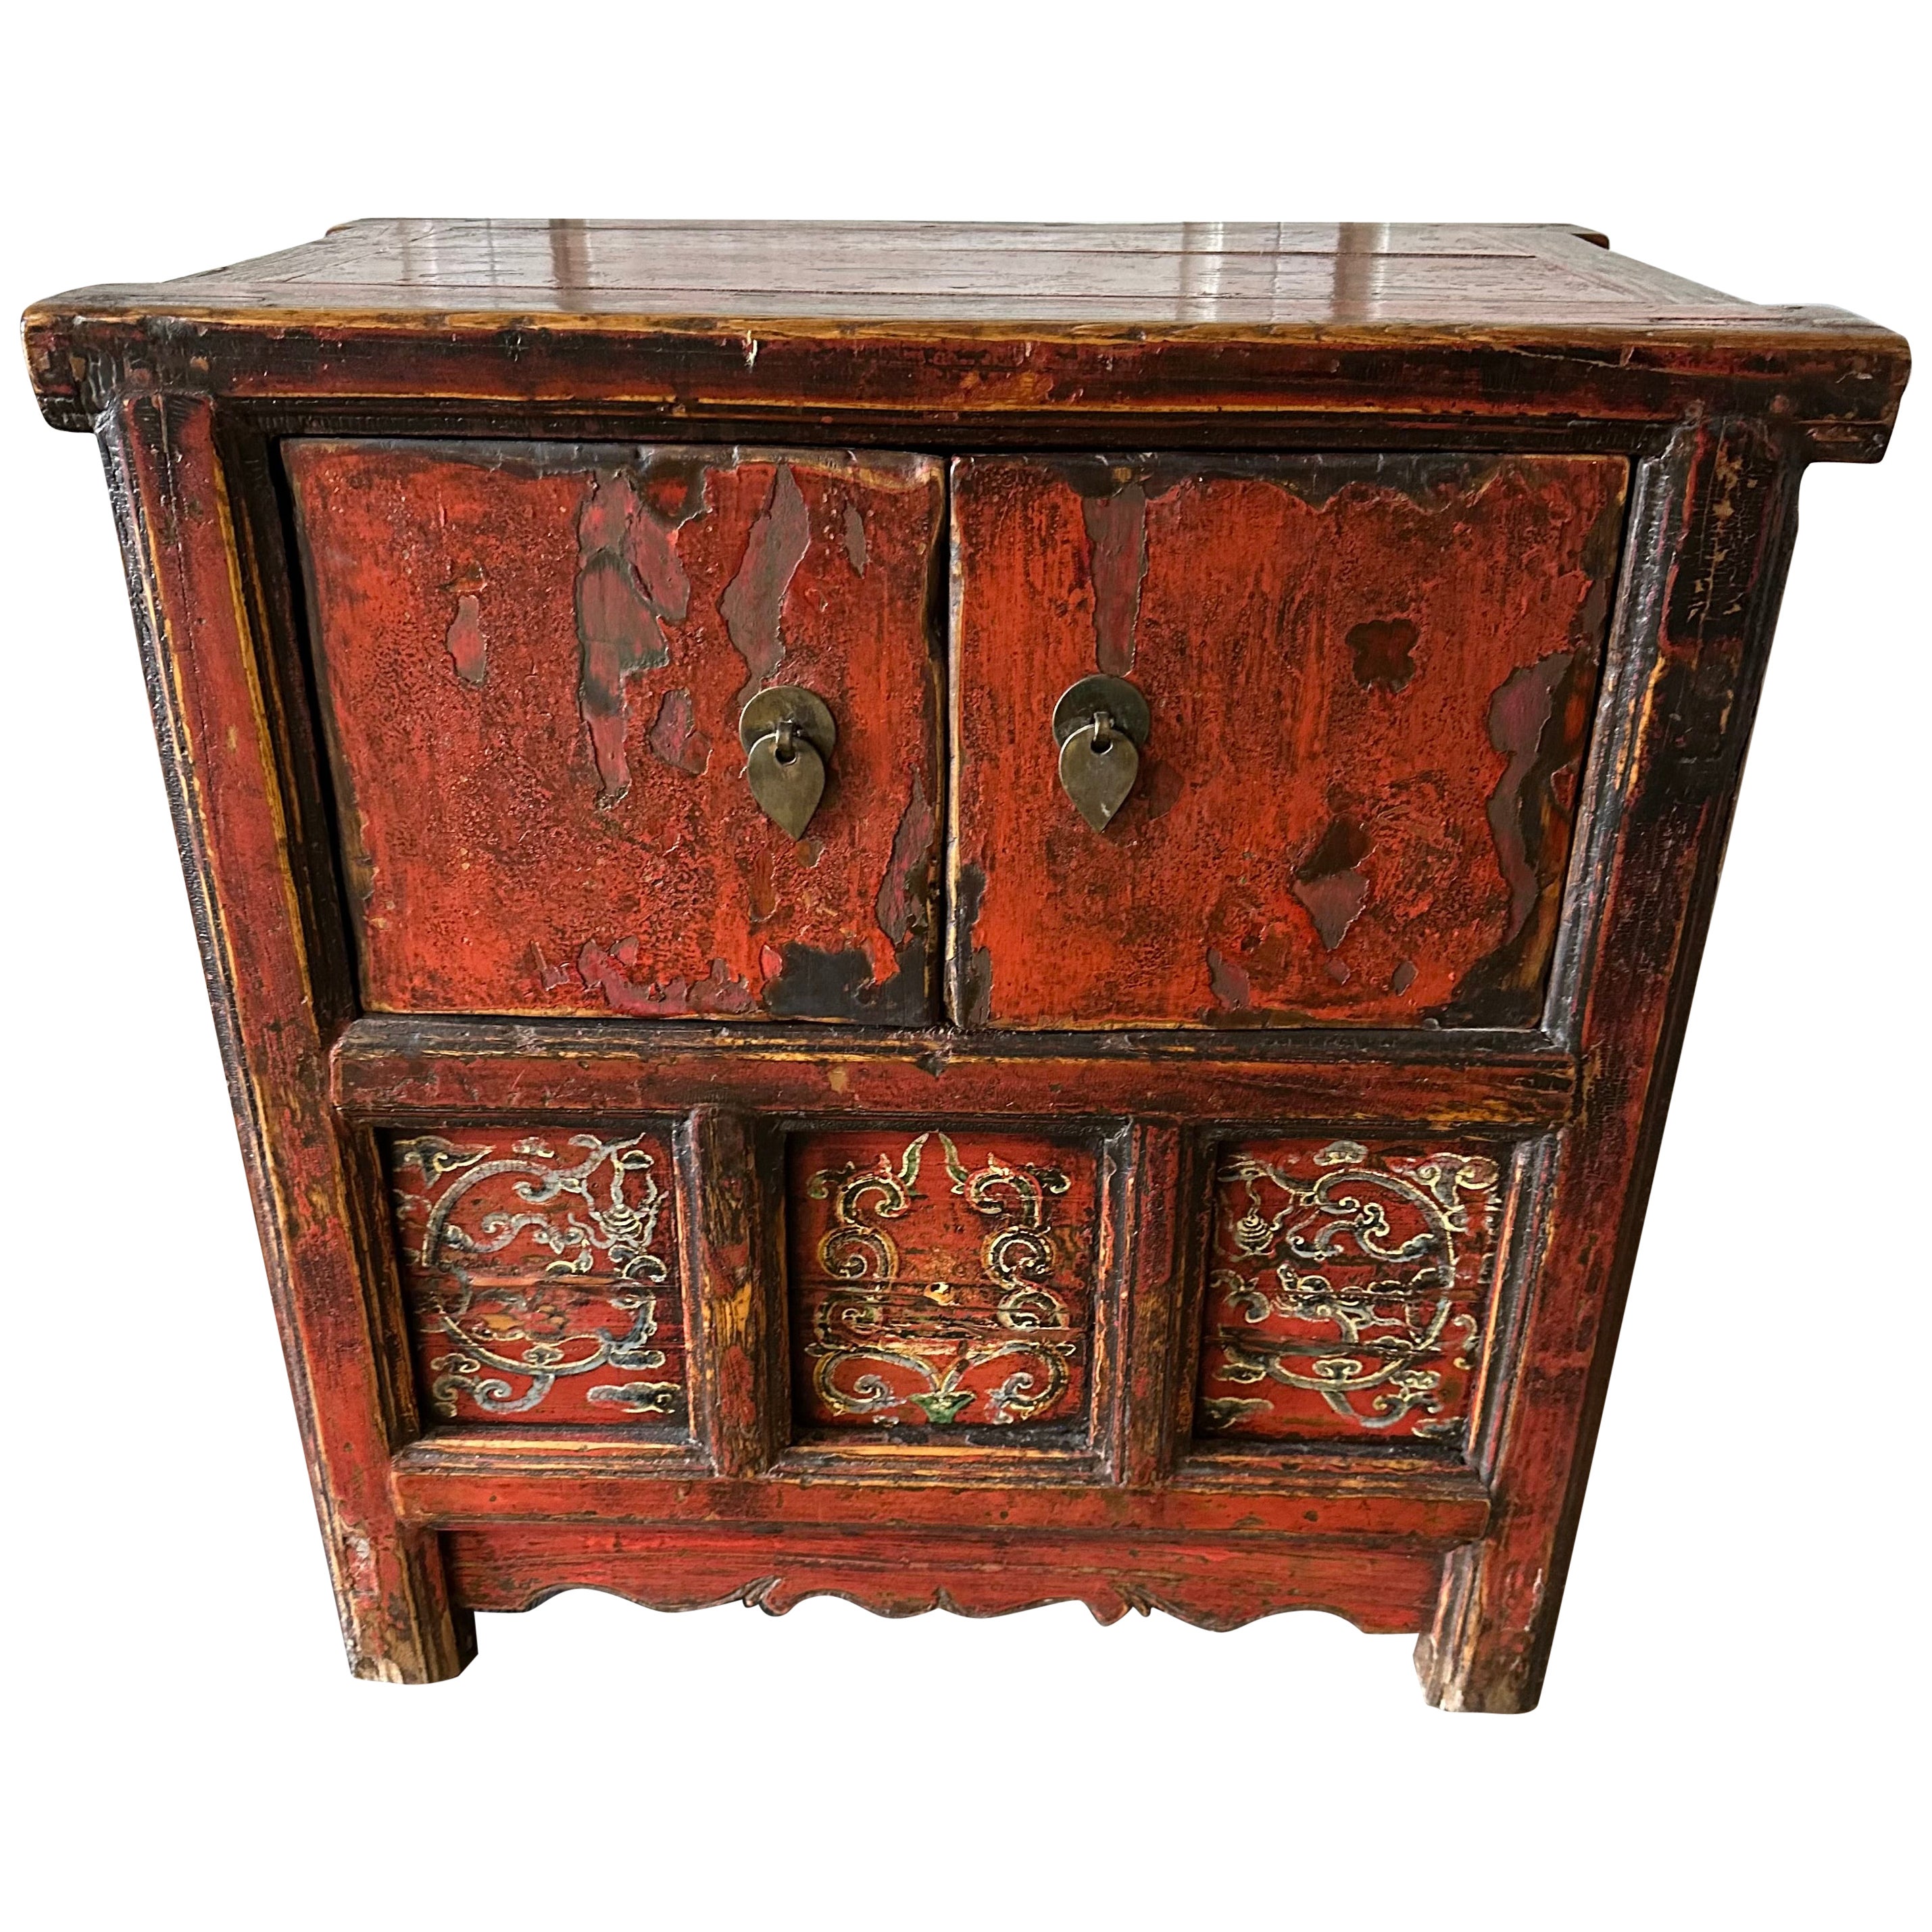 Late Qing Dynasty Low Chinese Red Lacquer Bedside Cabinet